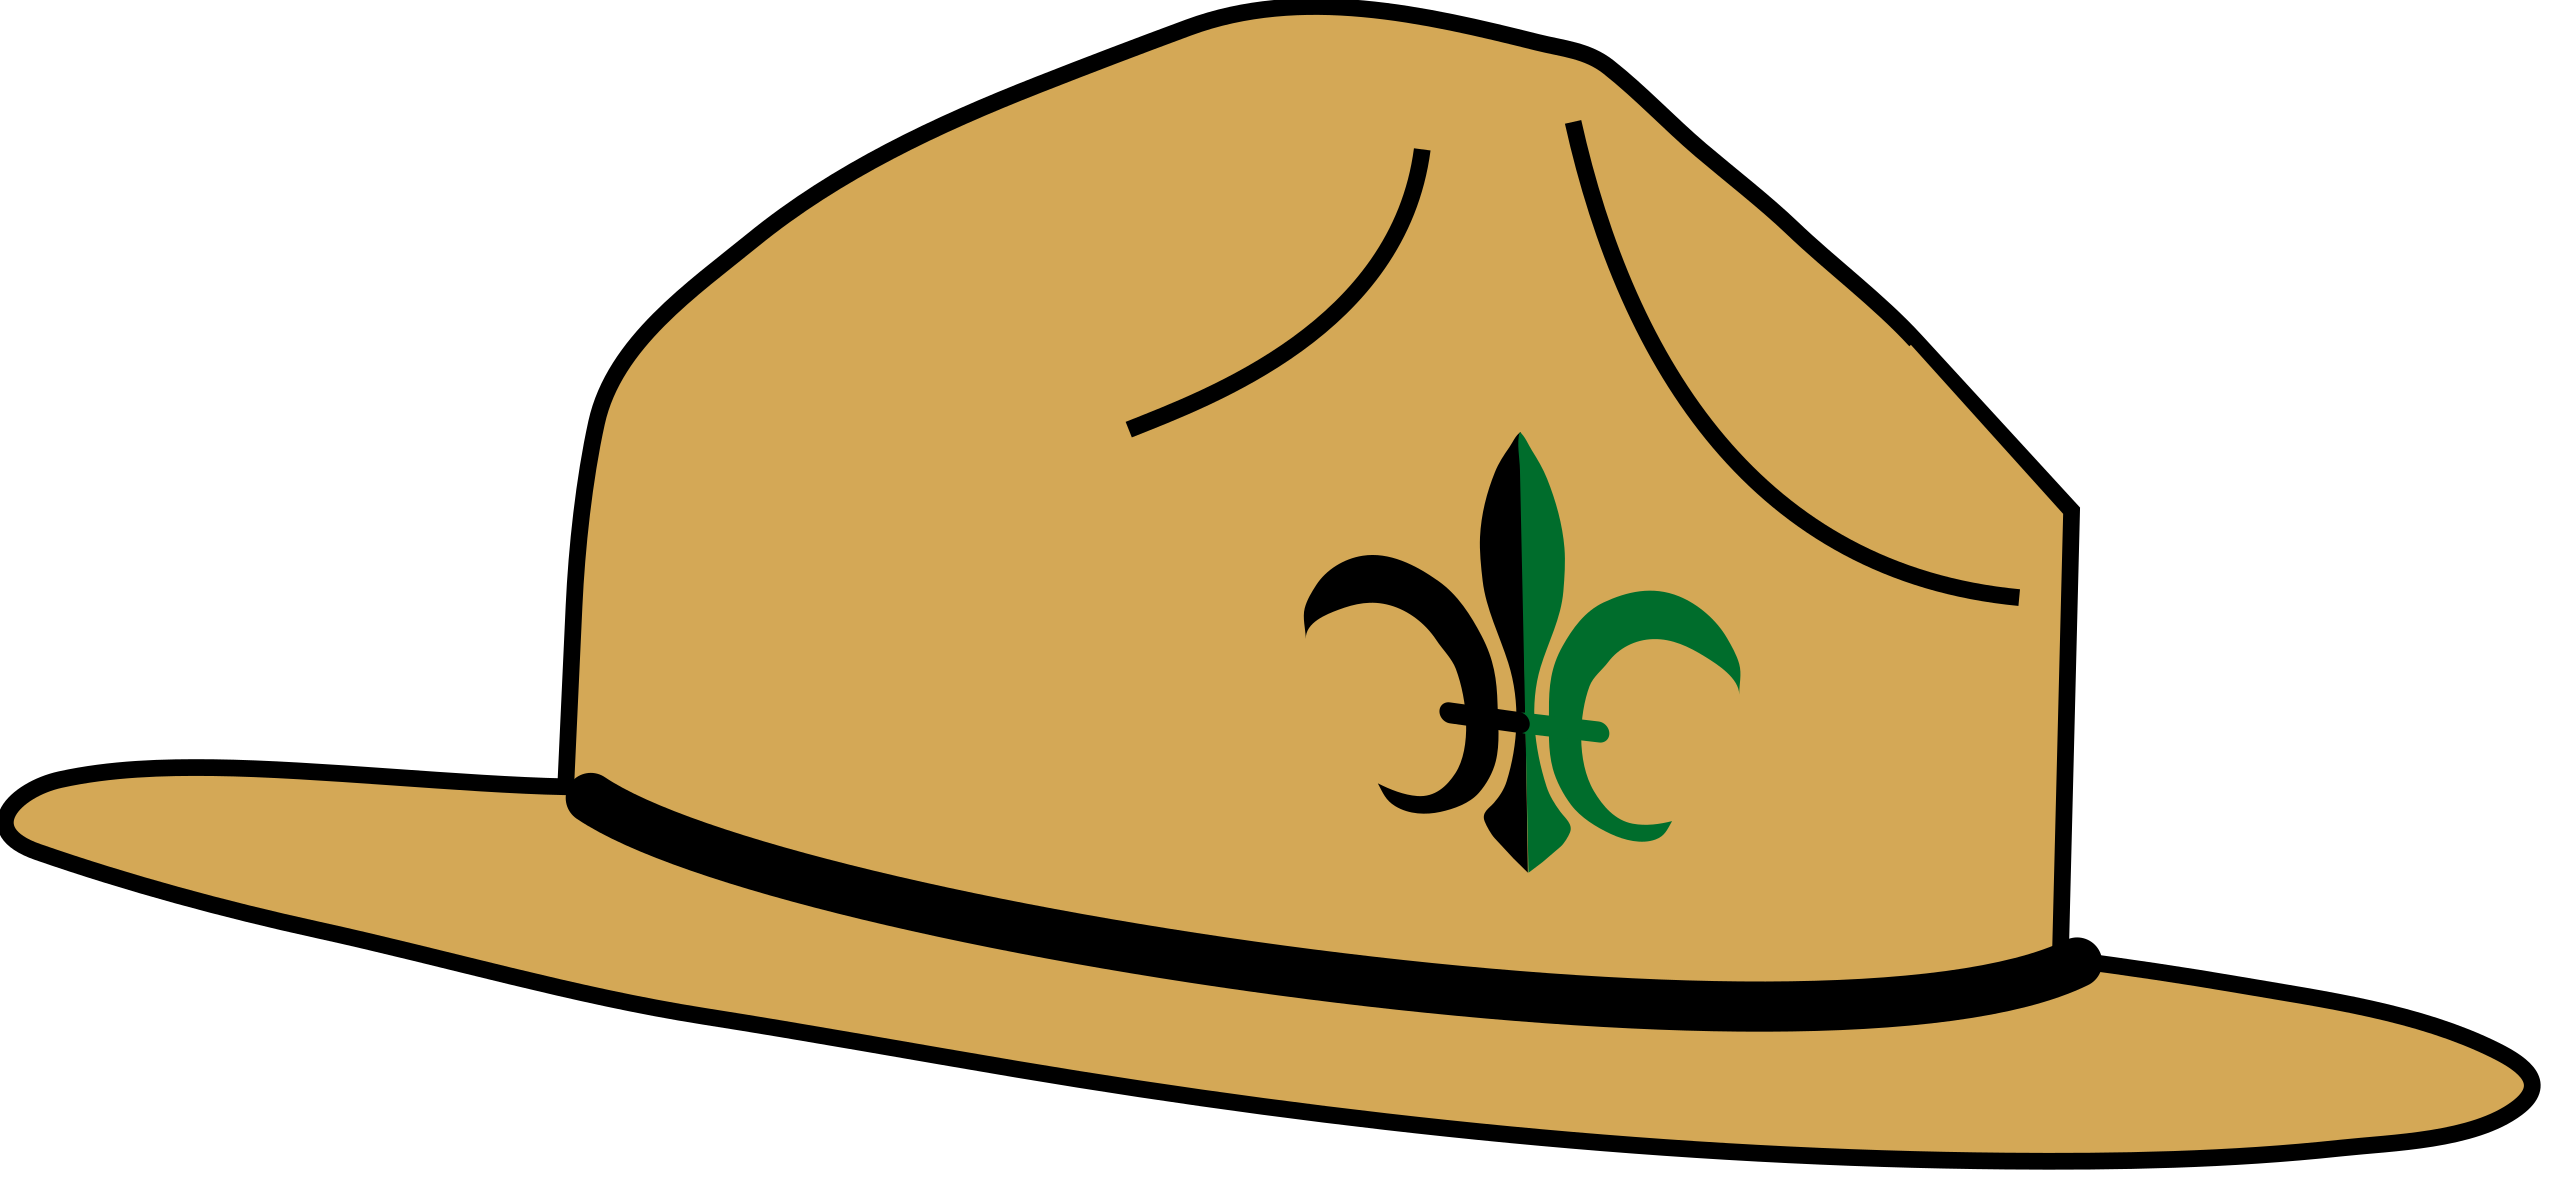 File:WikiProject Scouting campaign hat.svg - Wikimedia Commons